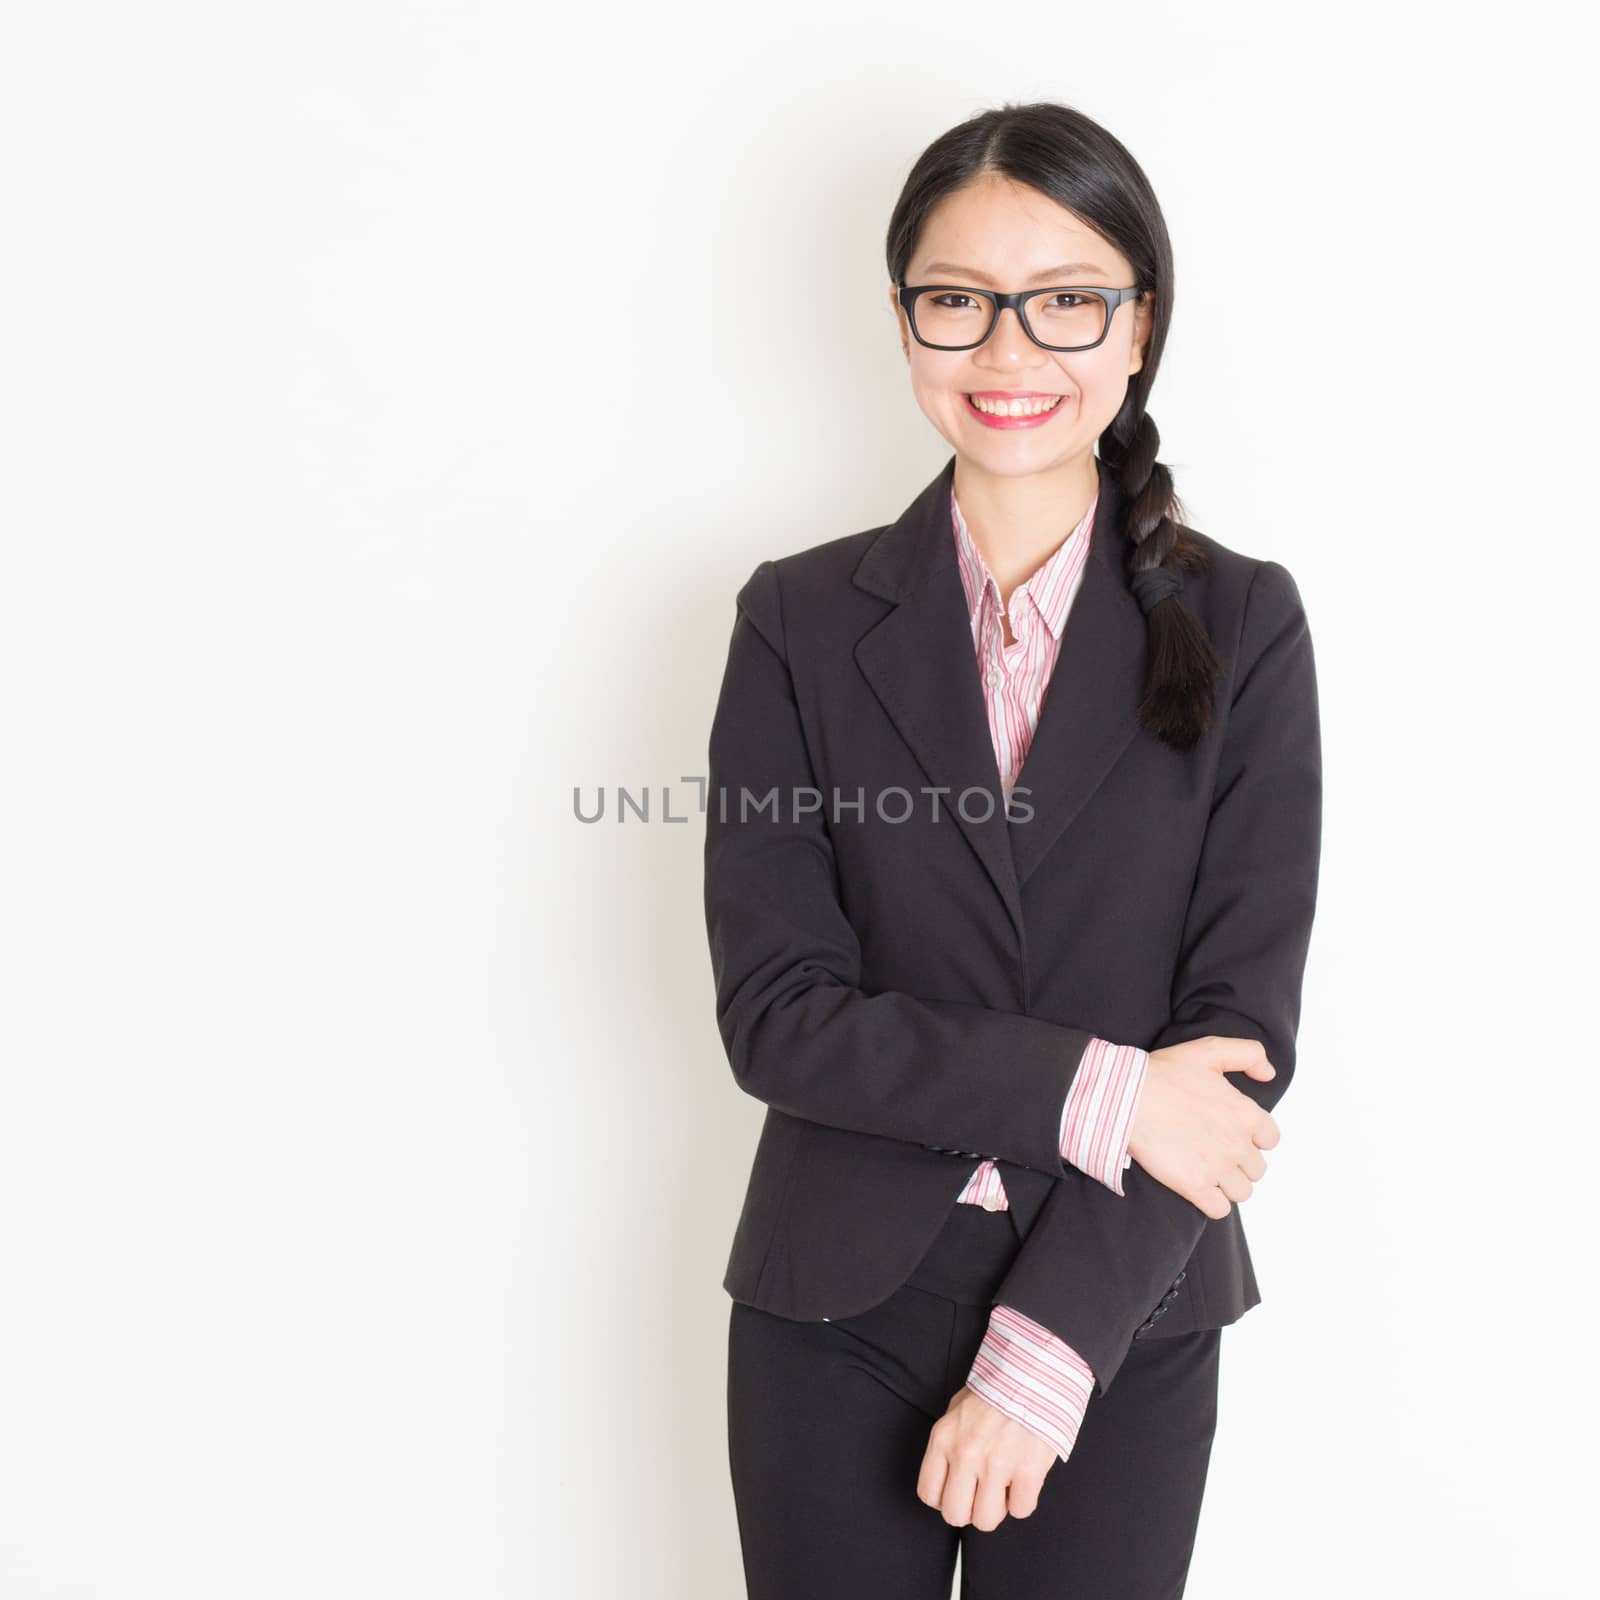 Asian businesswoman in formalwear smiling and looking at camera, standing on plain background.